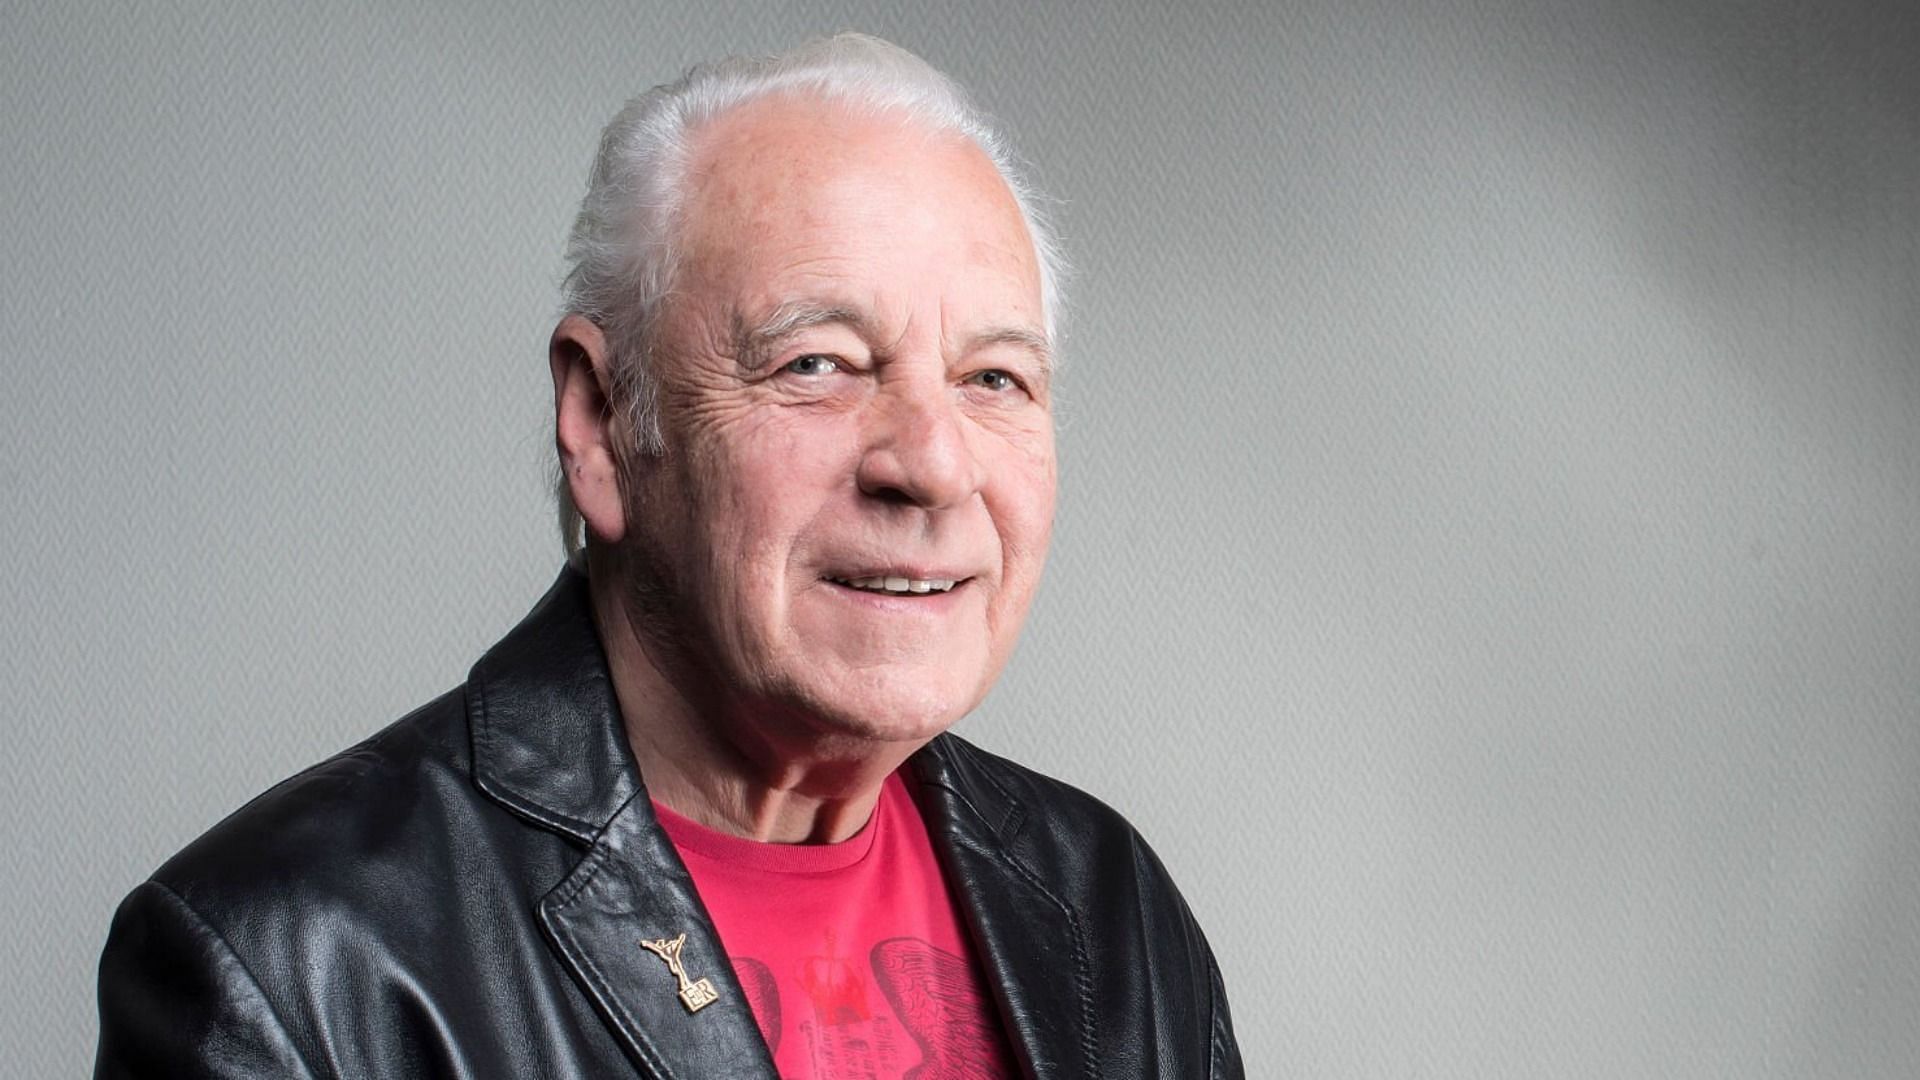 Procol Harum frontman Gary Brooker died after a battle with cancer (Image via Patrick Fouque/Getty Images)